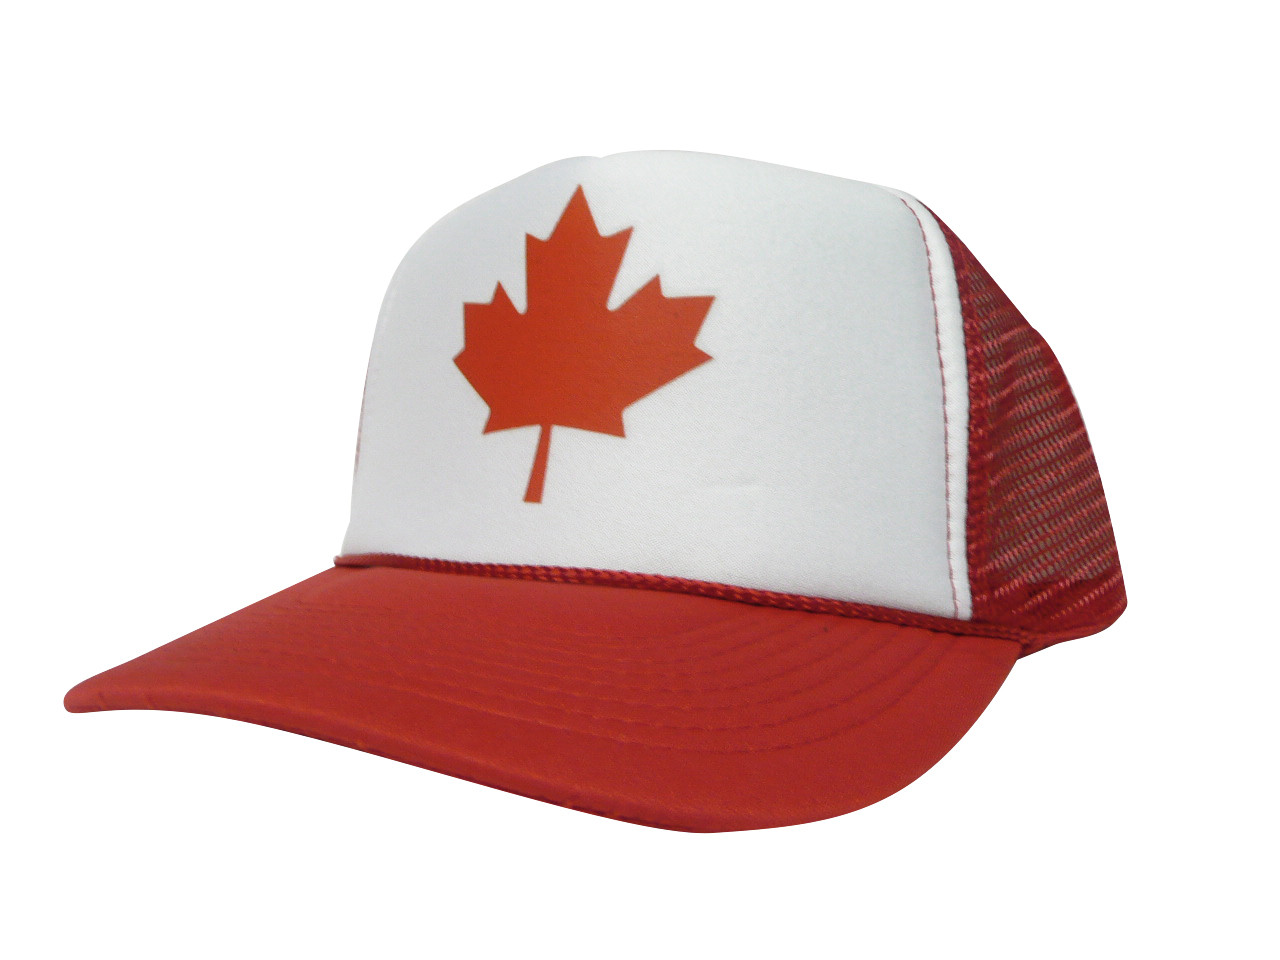 Canada Ball Cap,Men's Ball Cap,Vancover Canada,Pre-owned,Olive,Velcro Adjust,Adult,One Size,Free Shipping